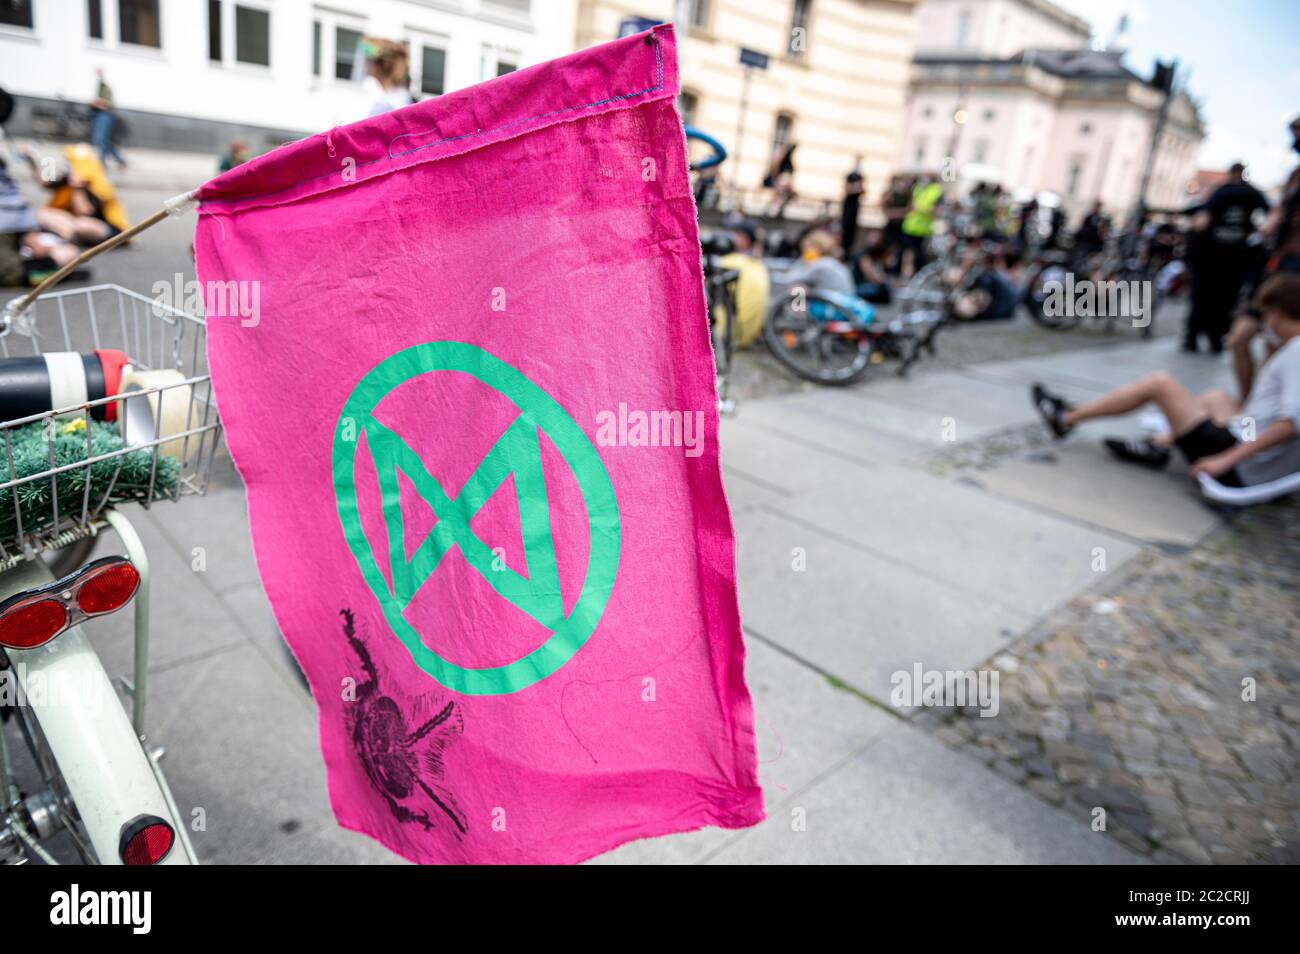 Berlin, Germany. 17th June, 2020. Demonstrators of Extinction Rebellion block the street in front of the headquarters of the German Association of the Automotive Industry (VDA). Credit: Fabian Sommer/dpa/Alamy Live News Stock Photo